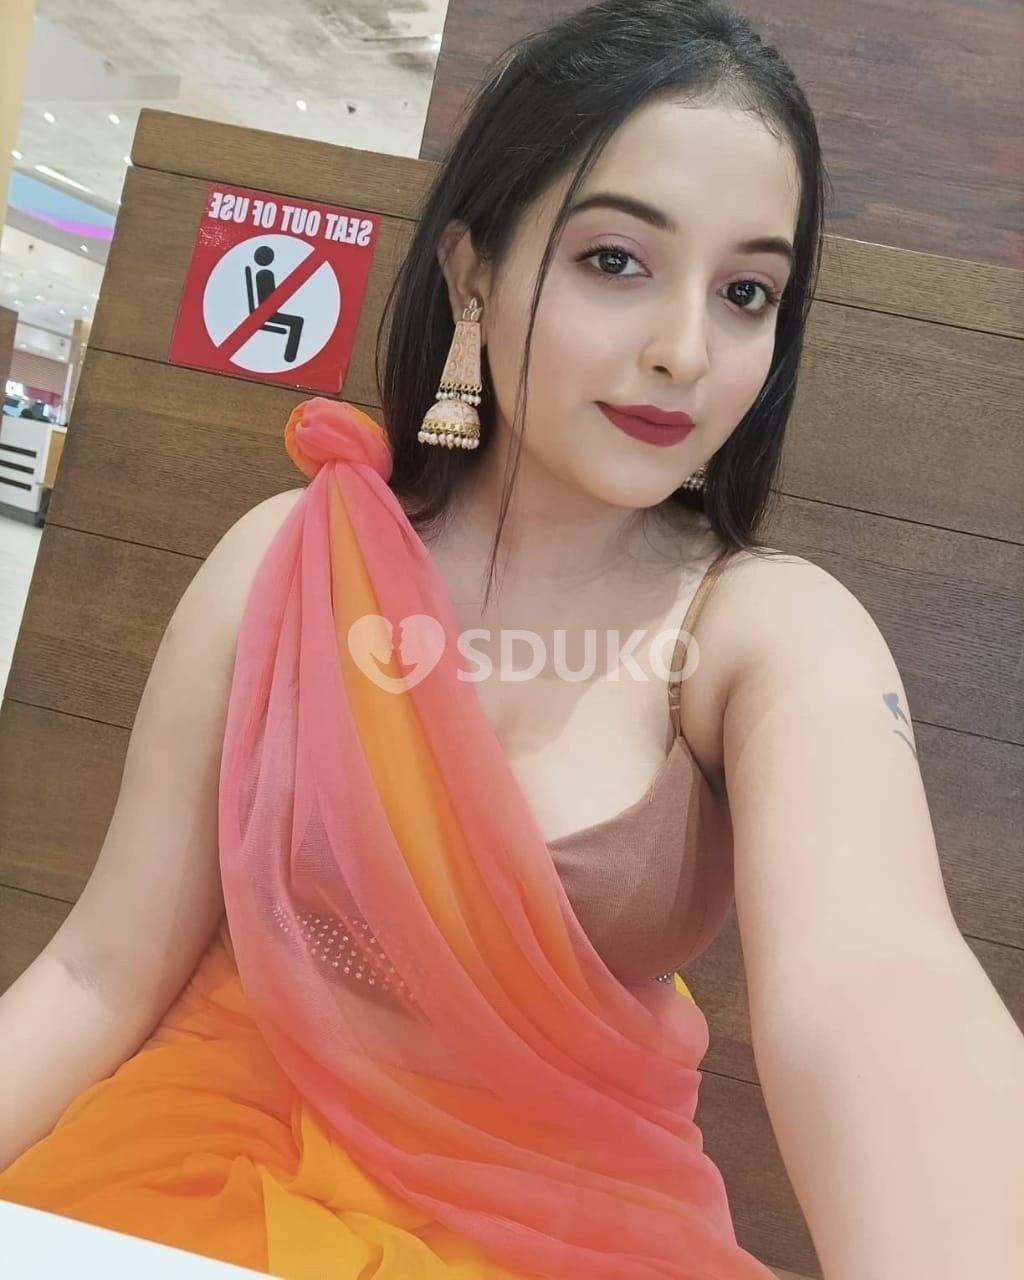 Ameerpet best ⭐ VIP high profile independent call girl service today low price model available